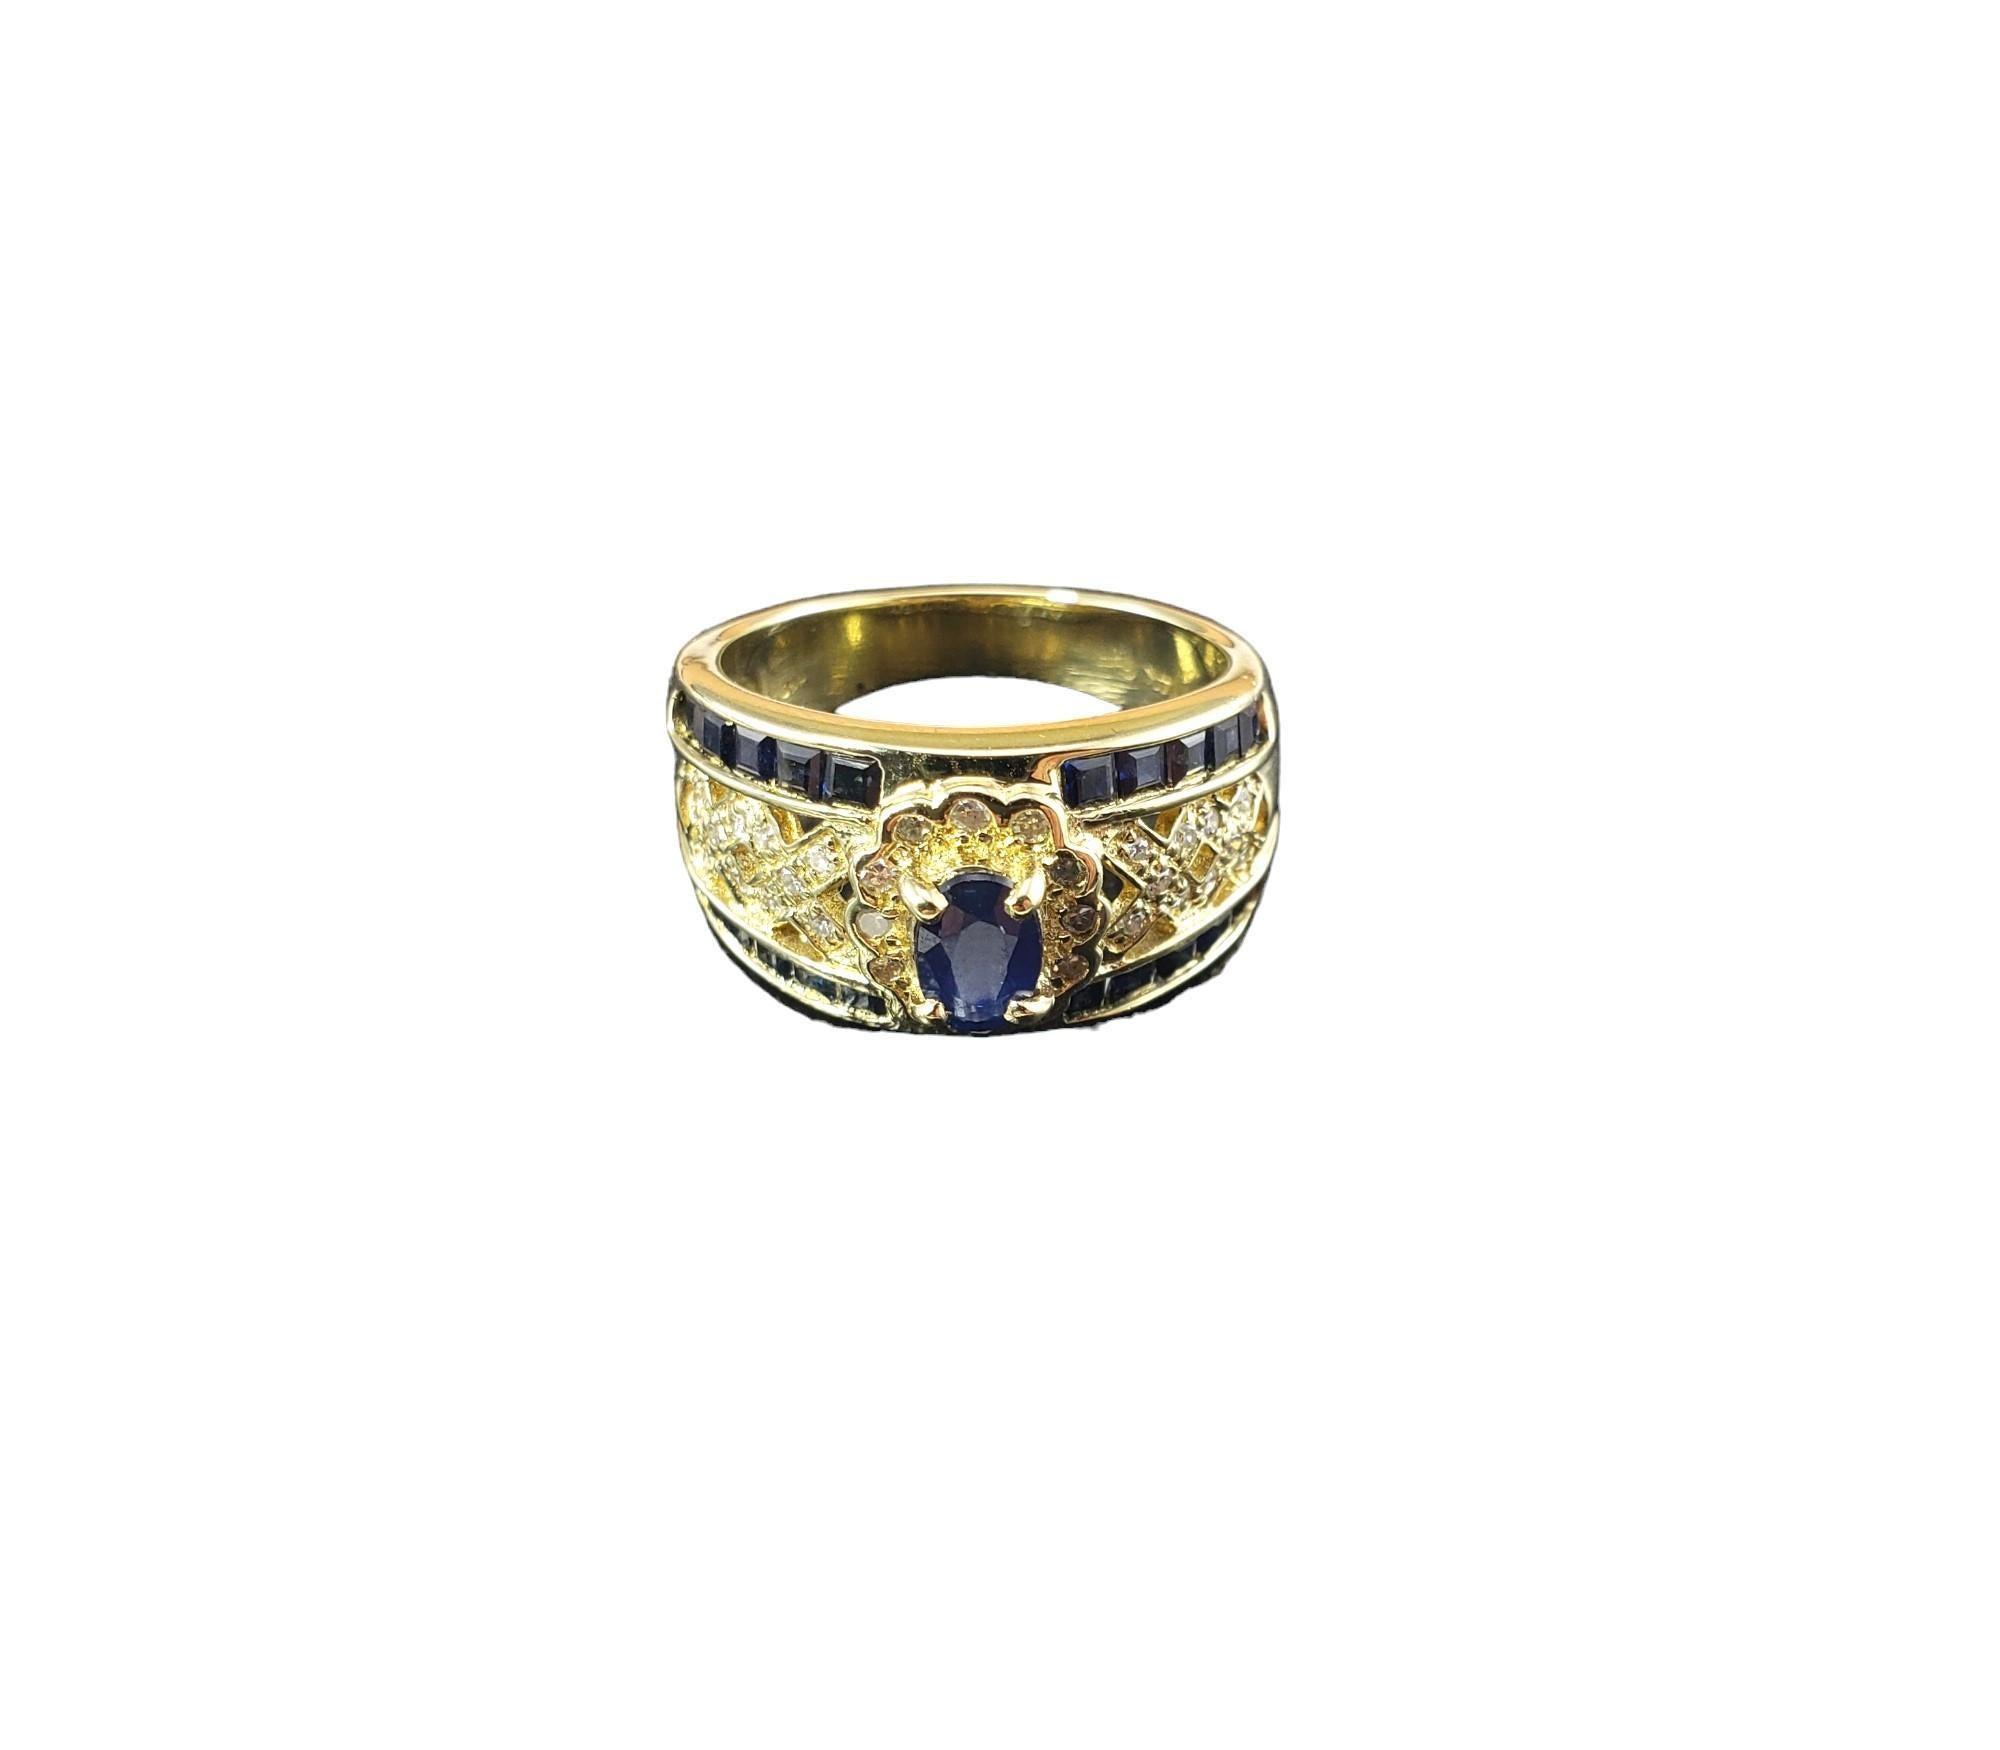 Vintage 14K Yellow Gold Sapphire and Diamond Ring Size 6.75-

This sparkling ring features one oval sapphire (6 mm x 5 mm), 20 square cut sapphires and 32 round single cut diamonds set in classic 14K yellow gold. 

Width: 11 mm.  Shank: 4